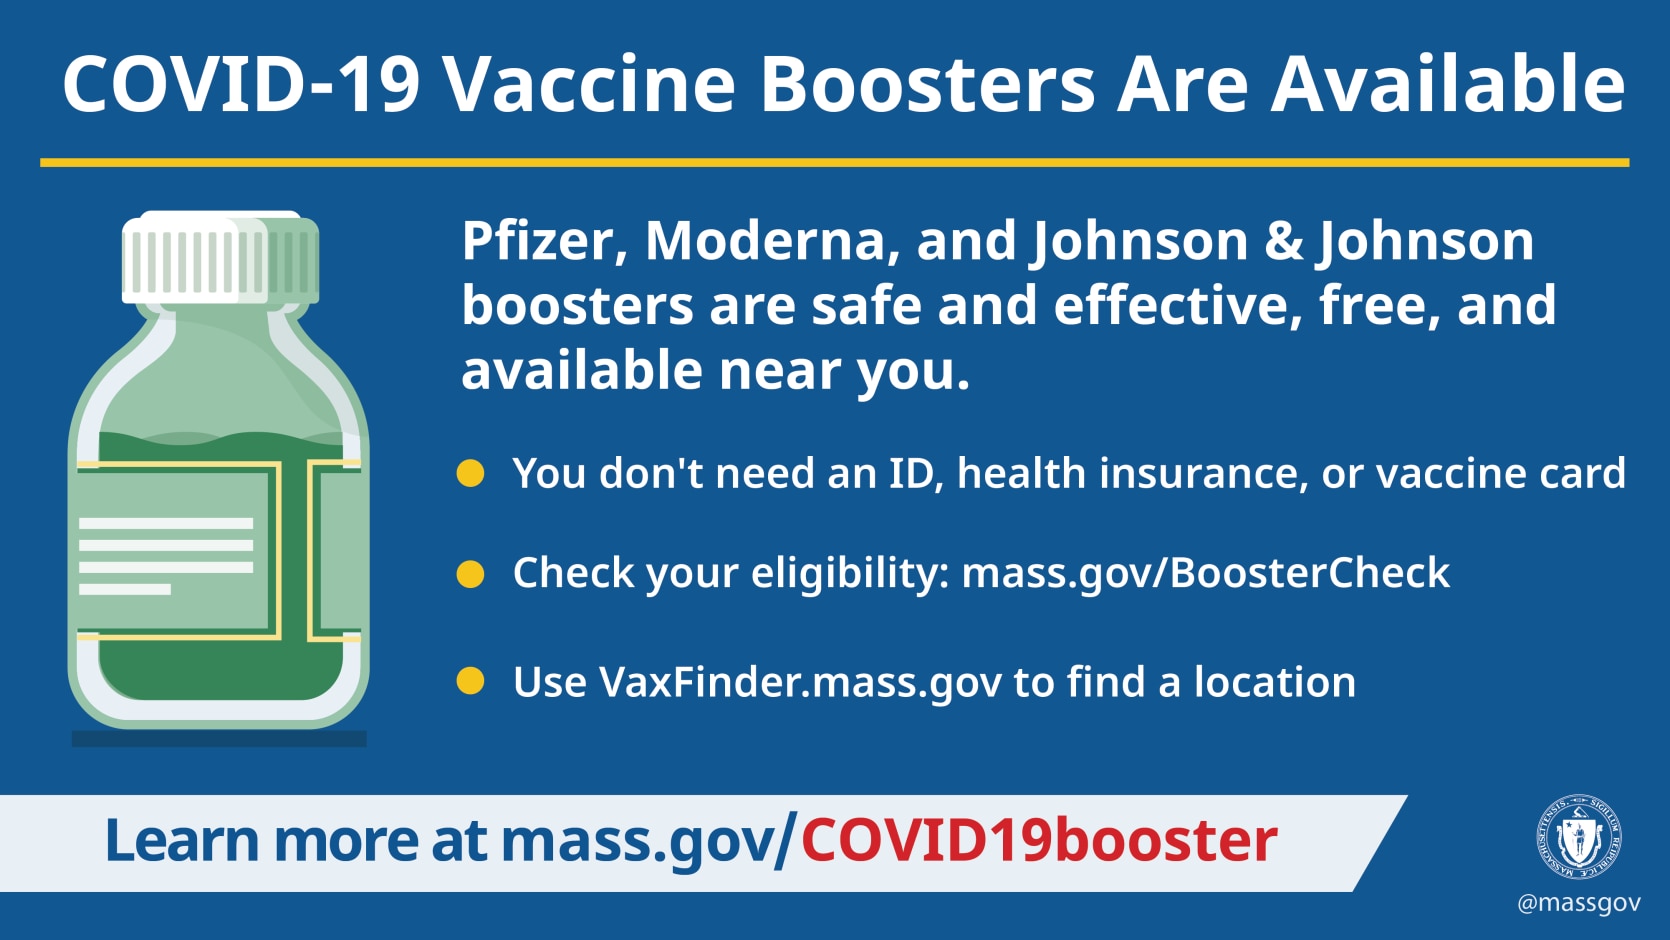 COVID-19 Vaccine Boosters are Available Pfizer, Moderna and Johnson & Johnson boosters are safe and effective, free, and available near you. You don't need an ID, health insurance, or vaccine card. Check you eligibility: mass.gov/BoosterCheck. Use VaxFinder.mass.gov to find a location. Learn more at mass.gov/COVID19booster